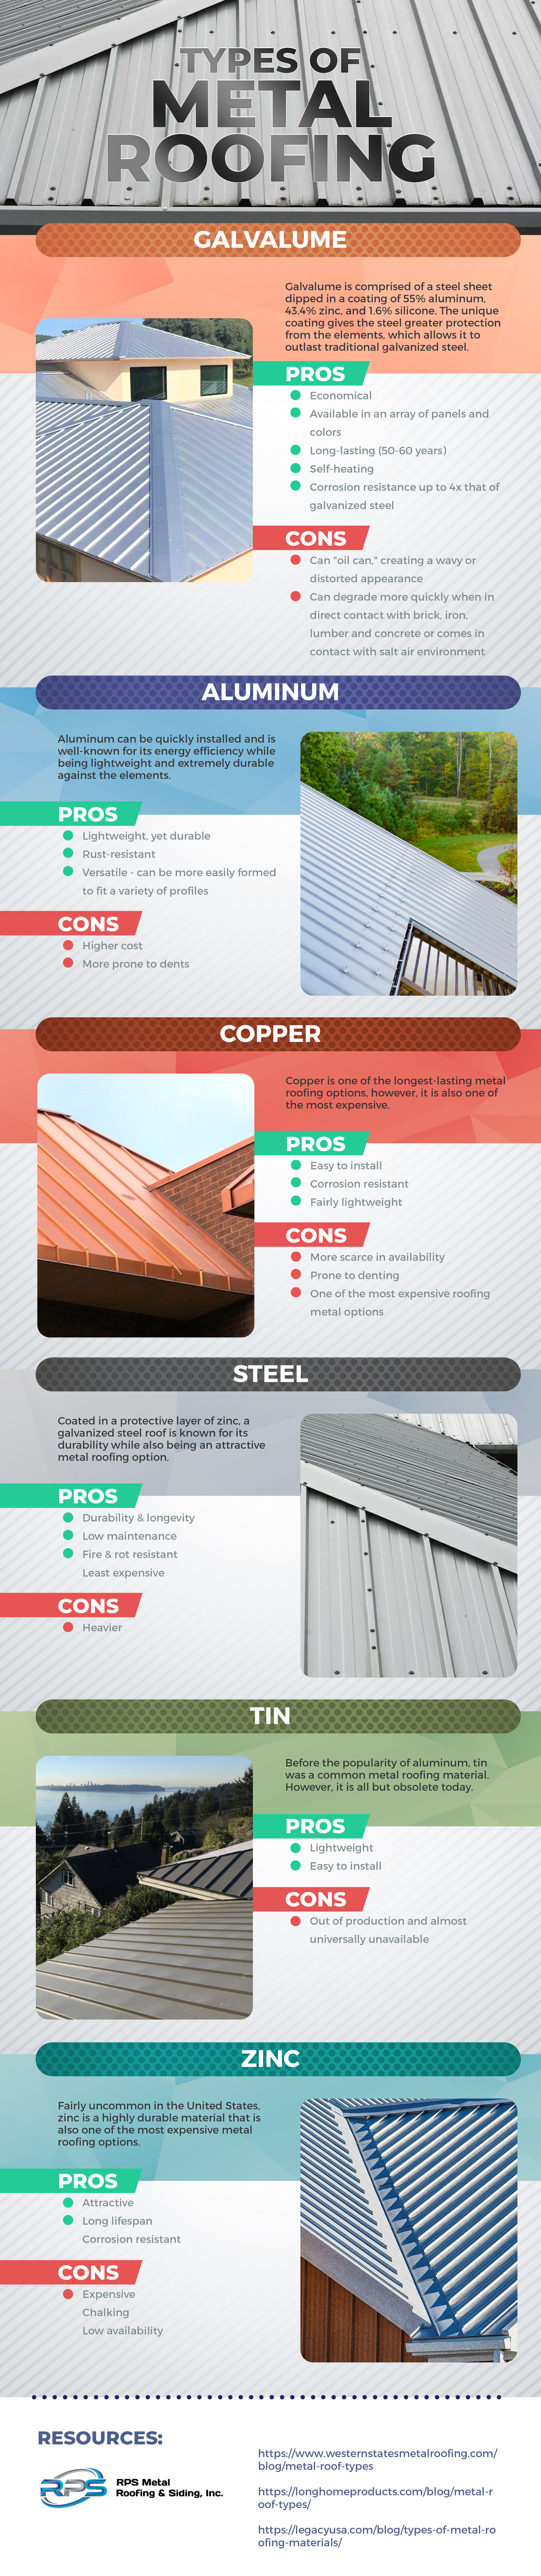 infographic displaying types of metal roofing materials and their pros and cons